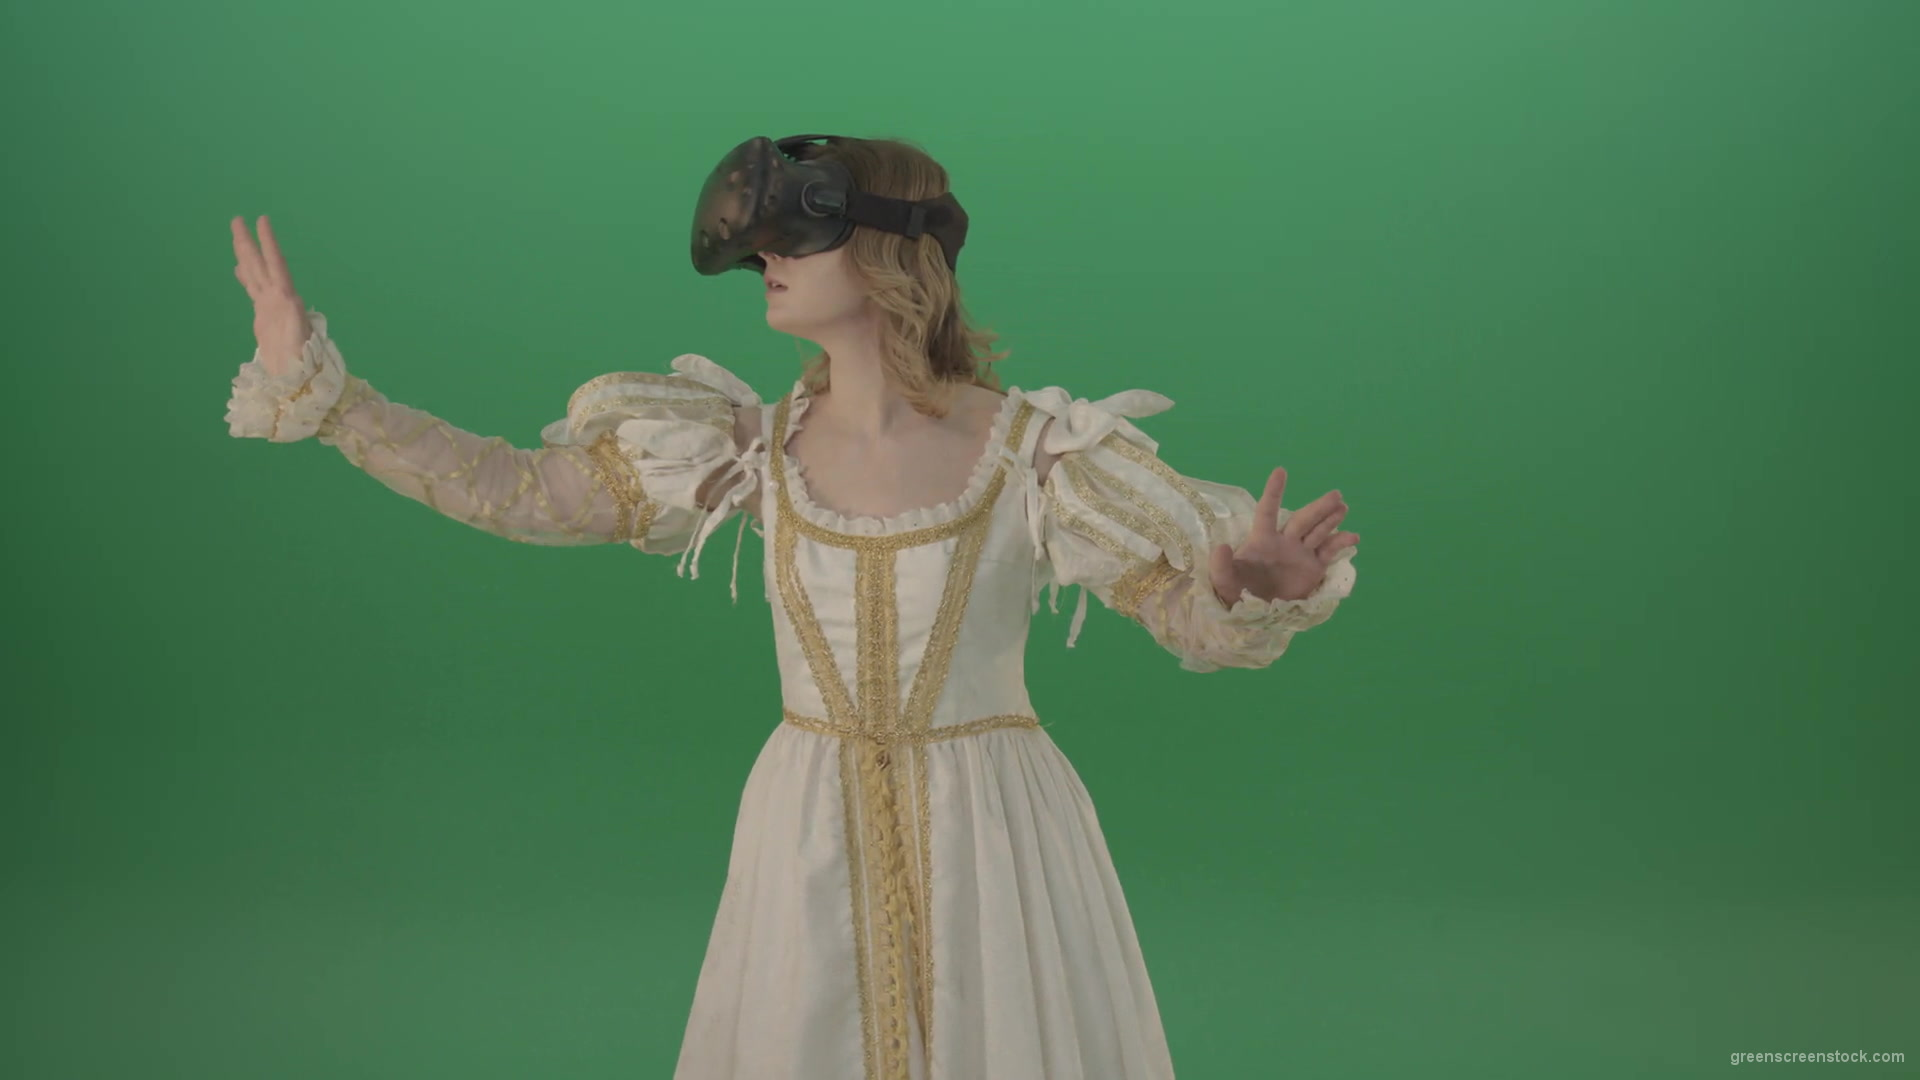 Girl-in-3-in-virtual-reality-has-swallowed-up-in-another-three-dimensional-world-isolated-on-green-screen-1920_005 Green Screen Stock